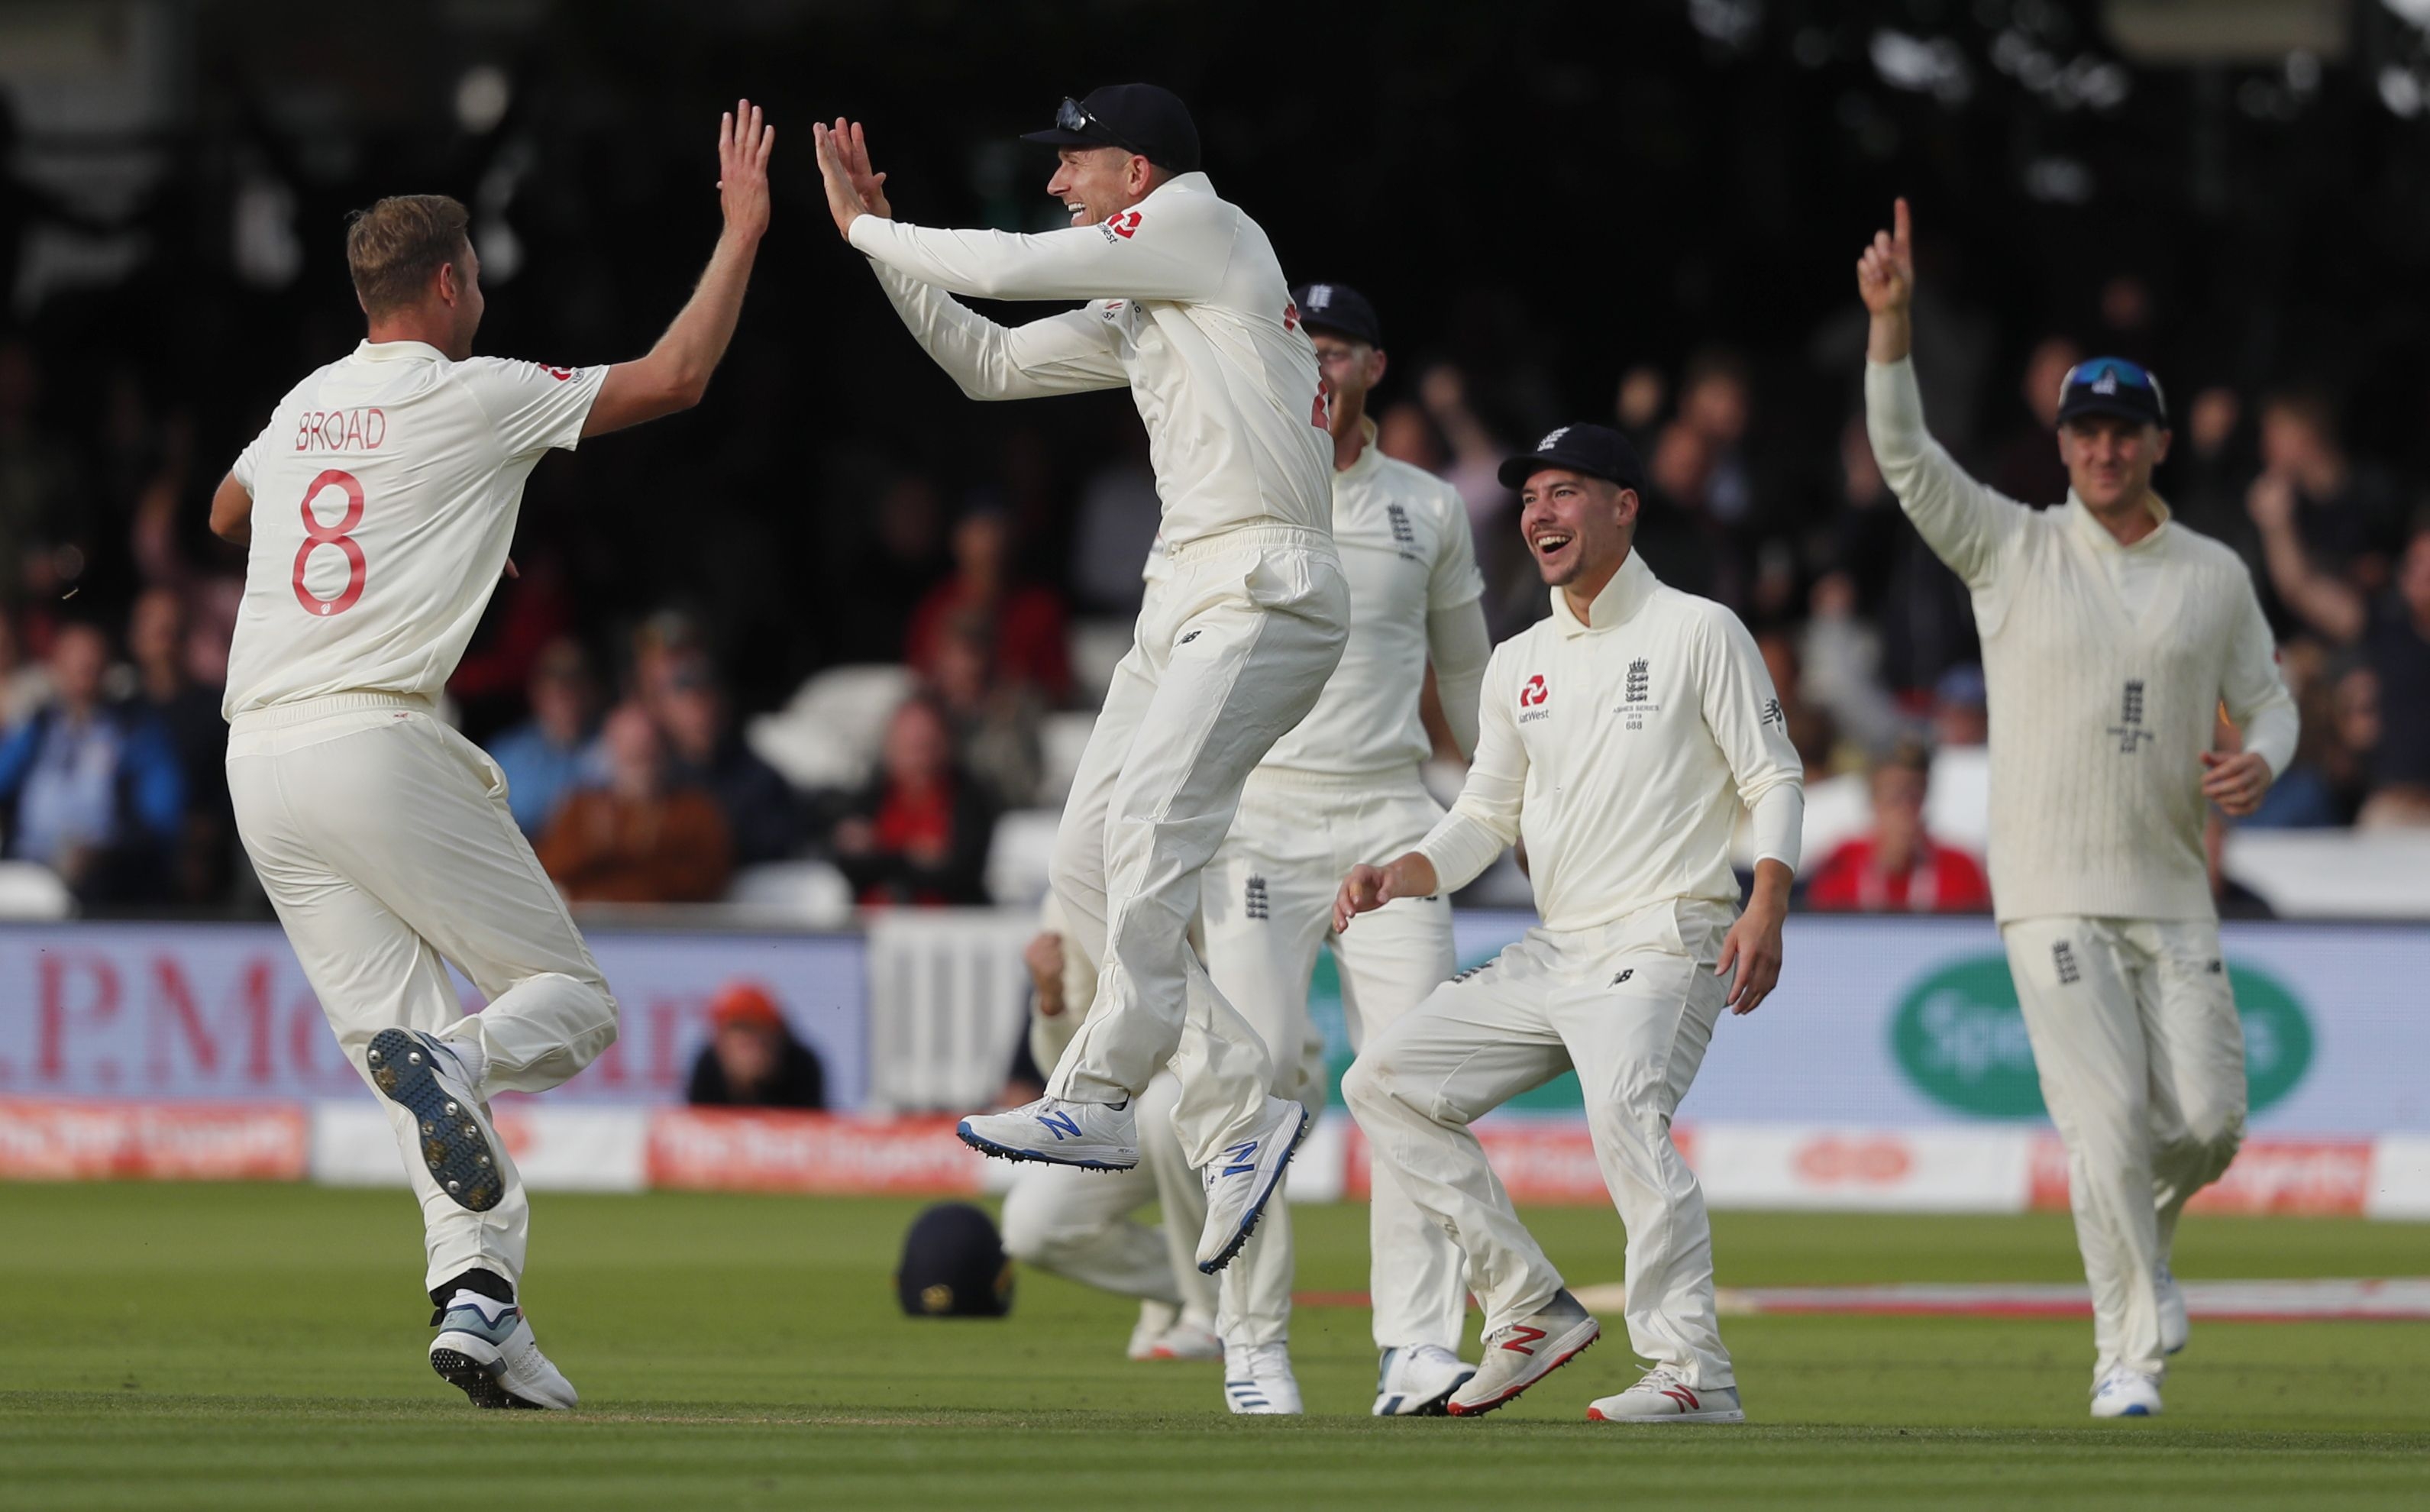 Ashes: Australia's fast start slowed by Bairstow, Broad